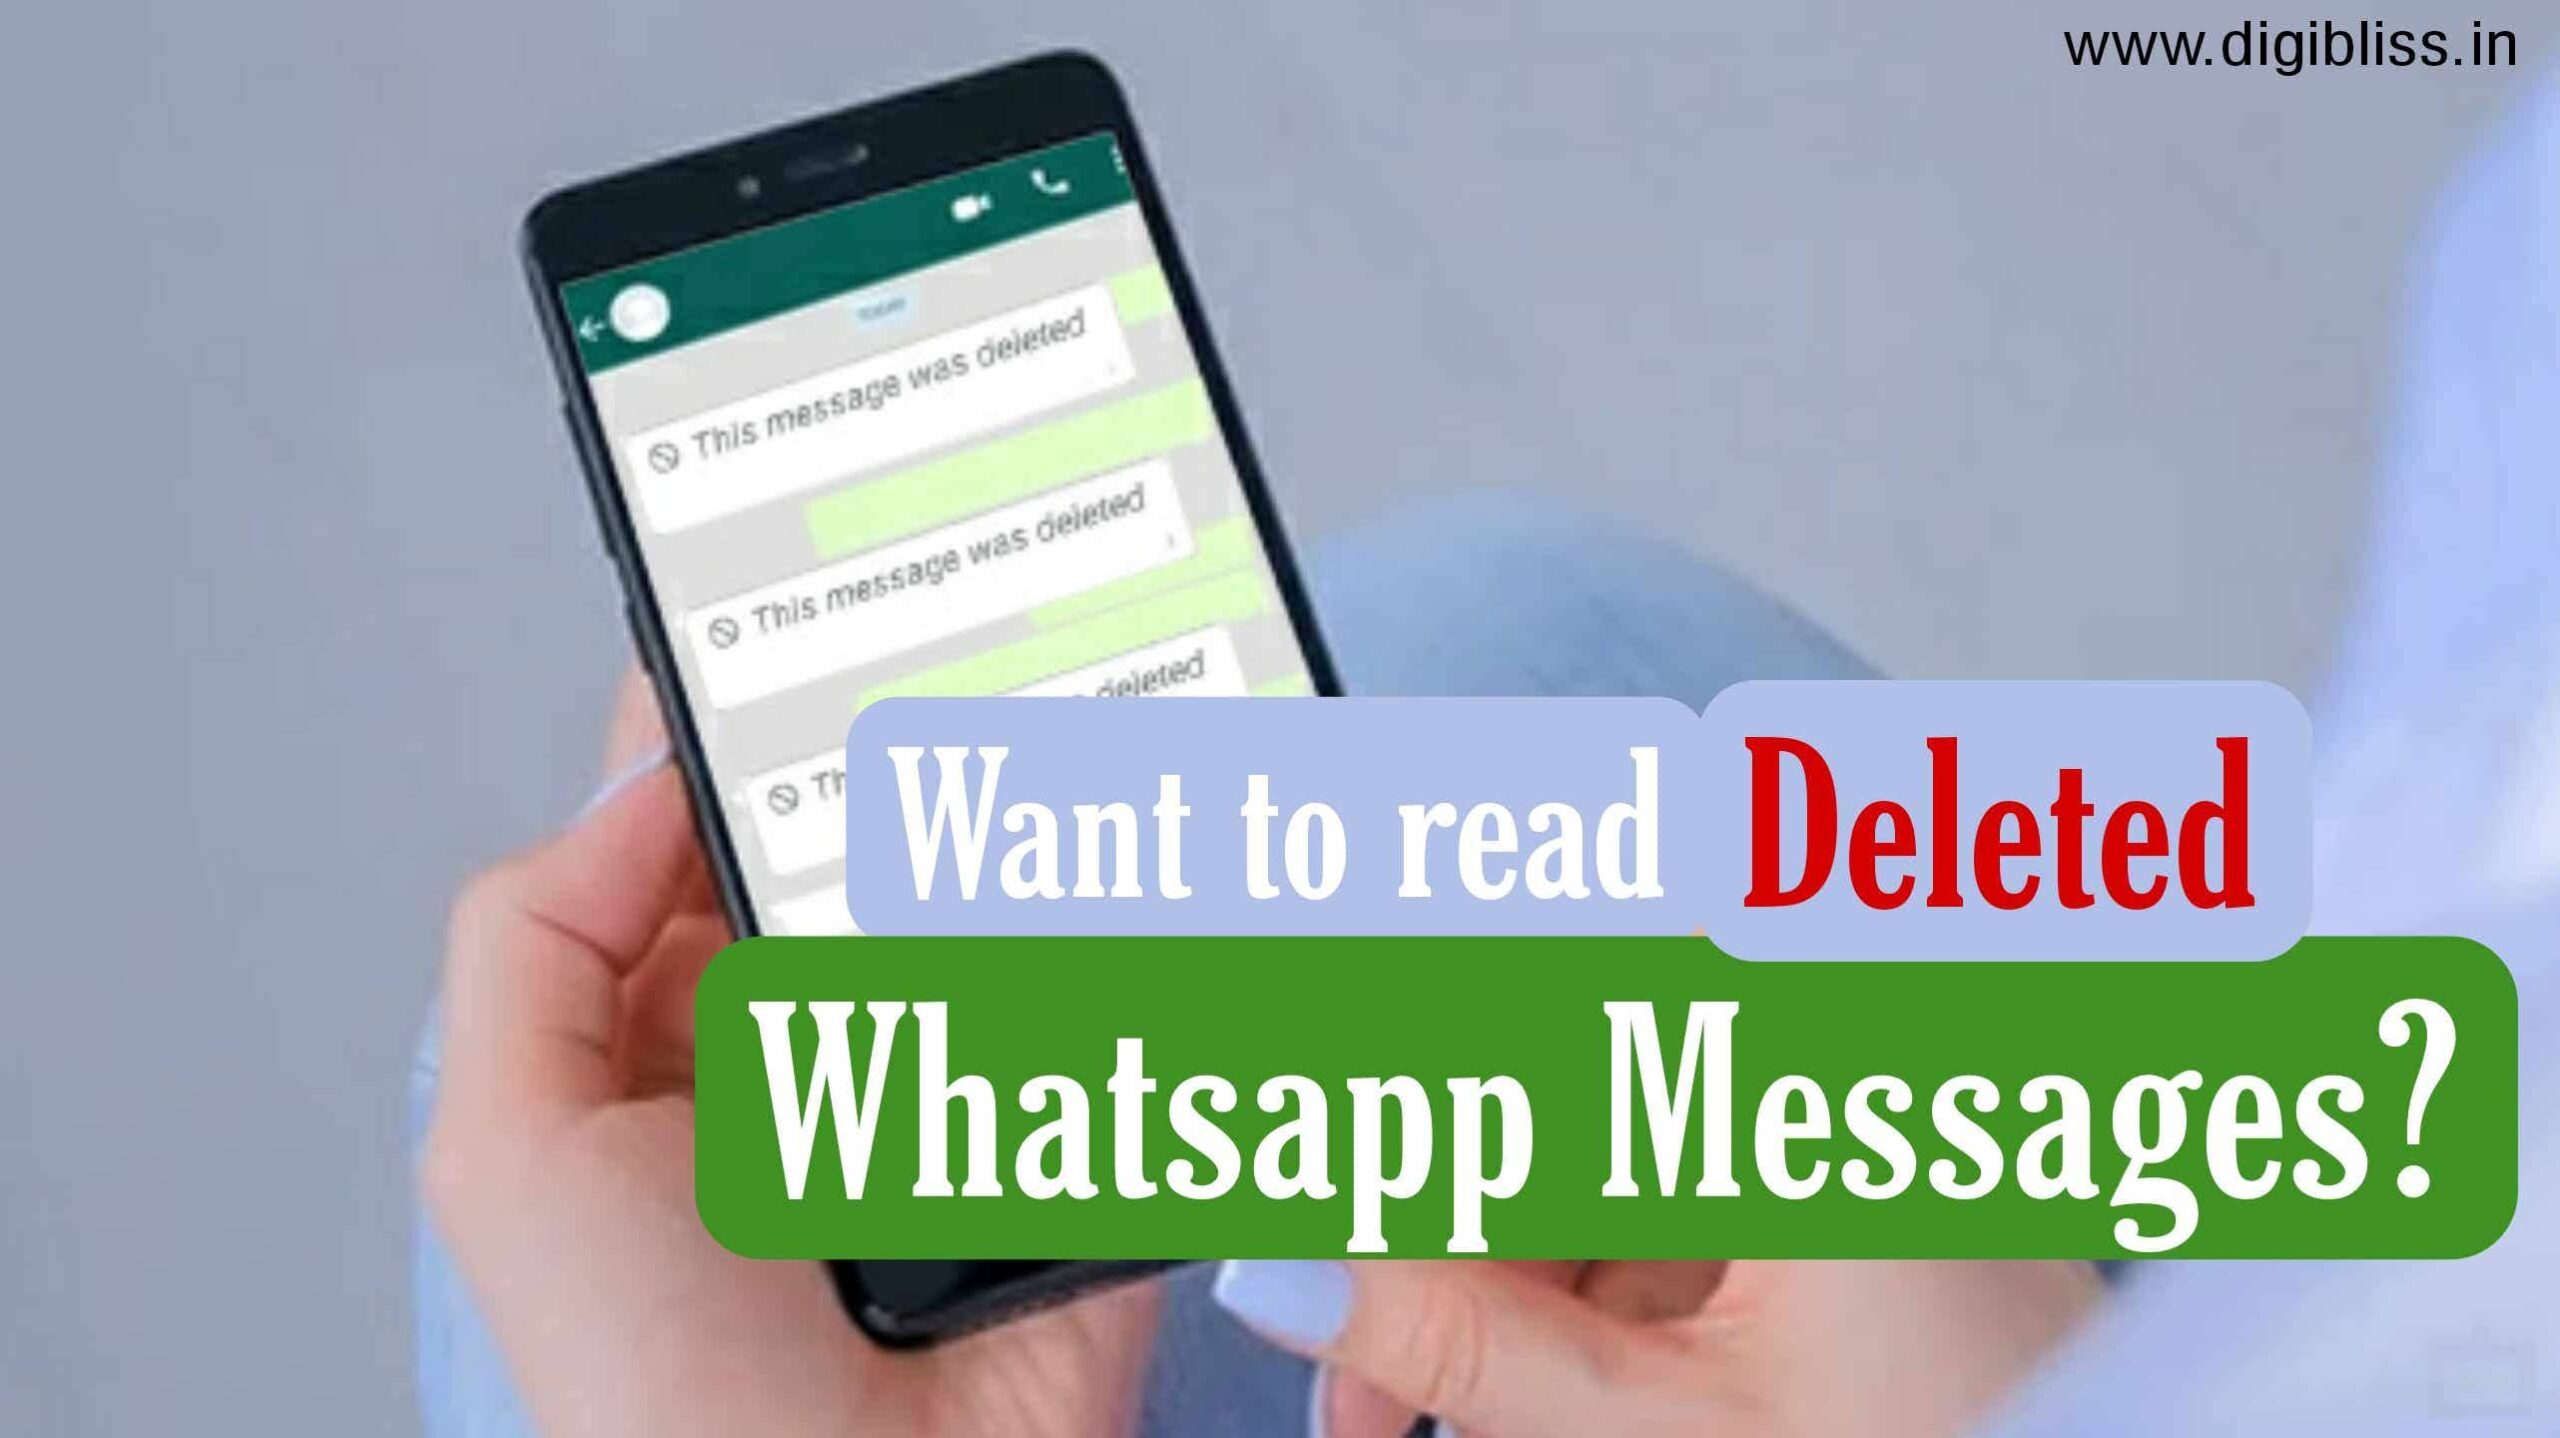 See Deleted WhatsApp Messages